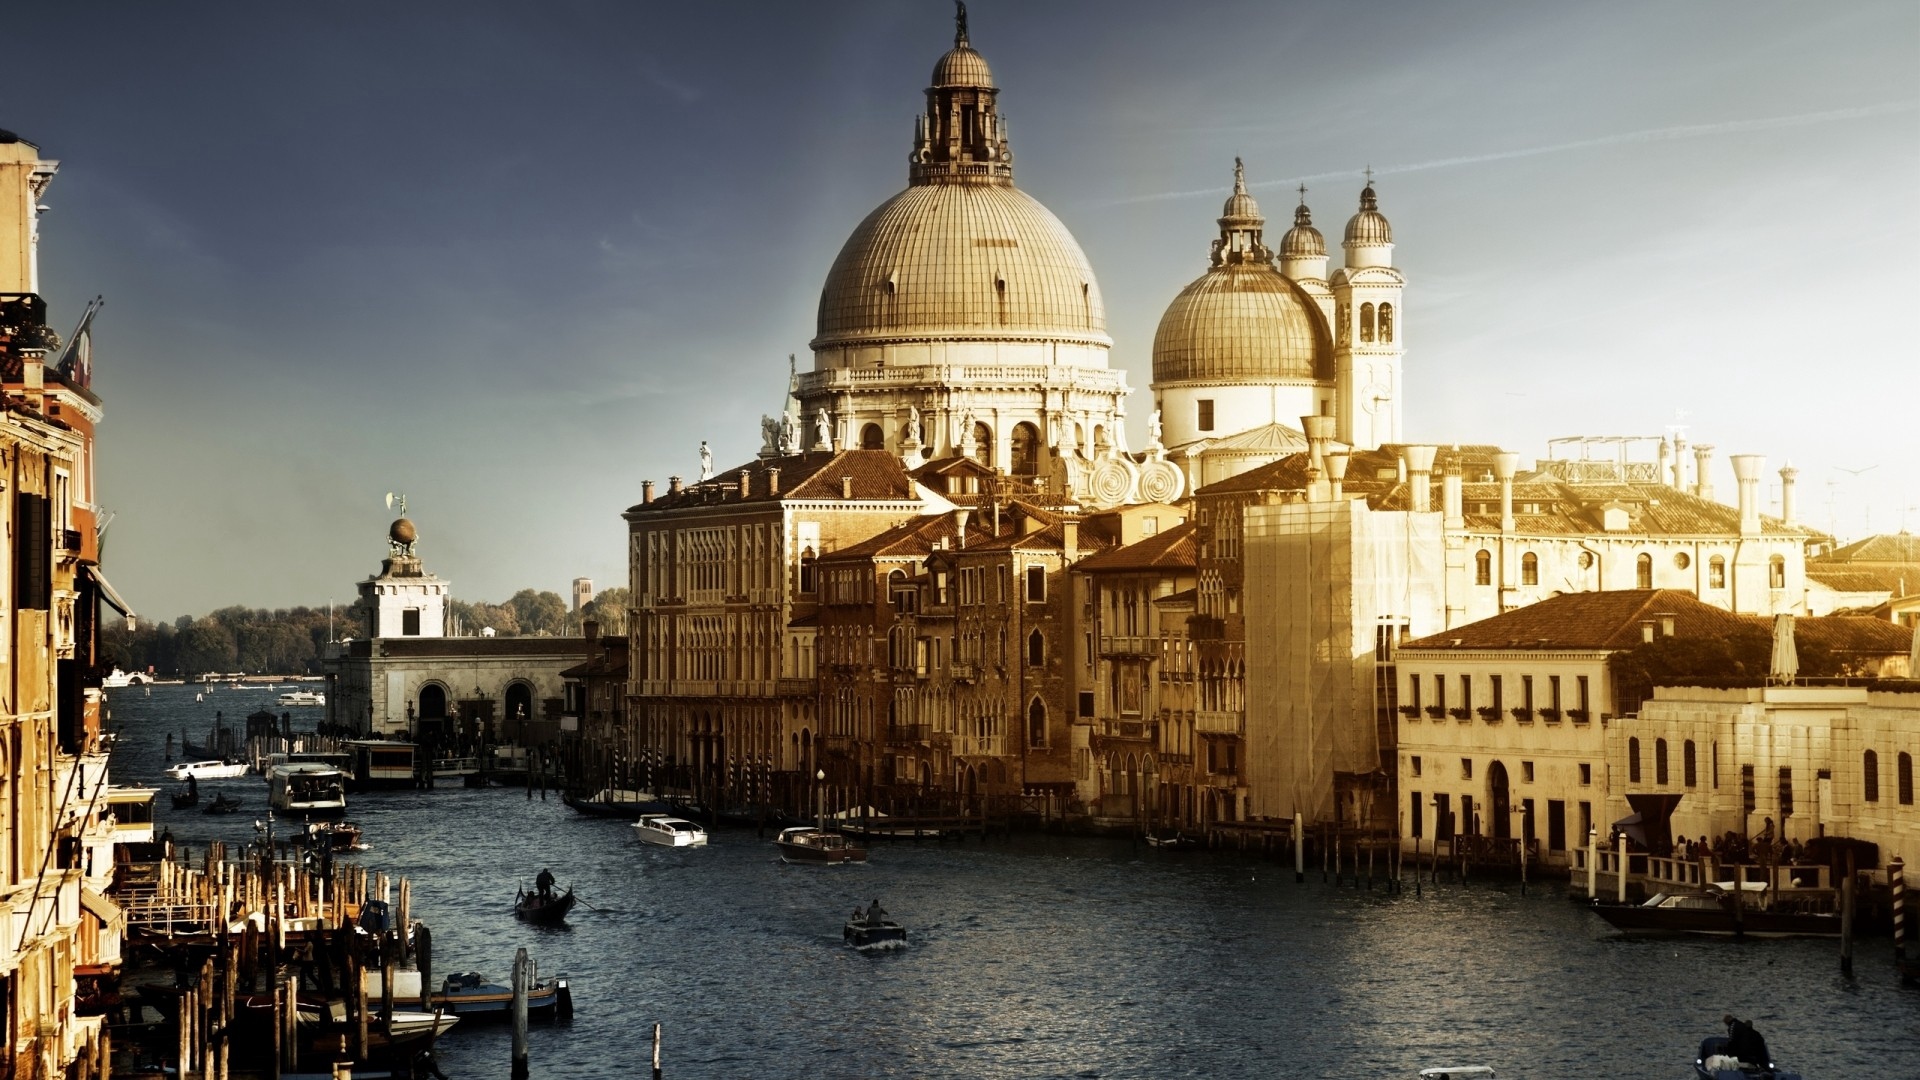 Venice Italy River Building Architecture Stone   Free Stock Photos